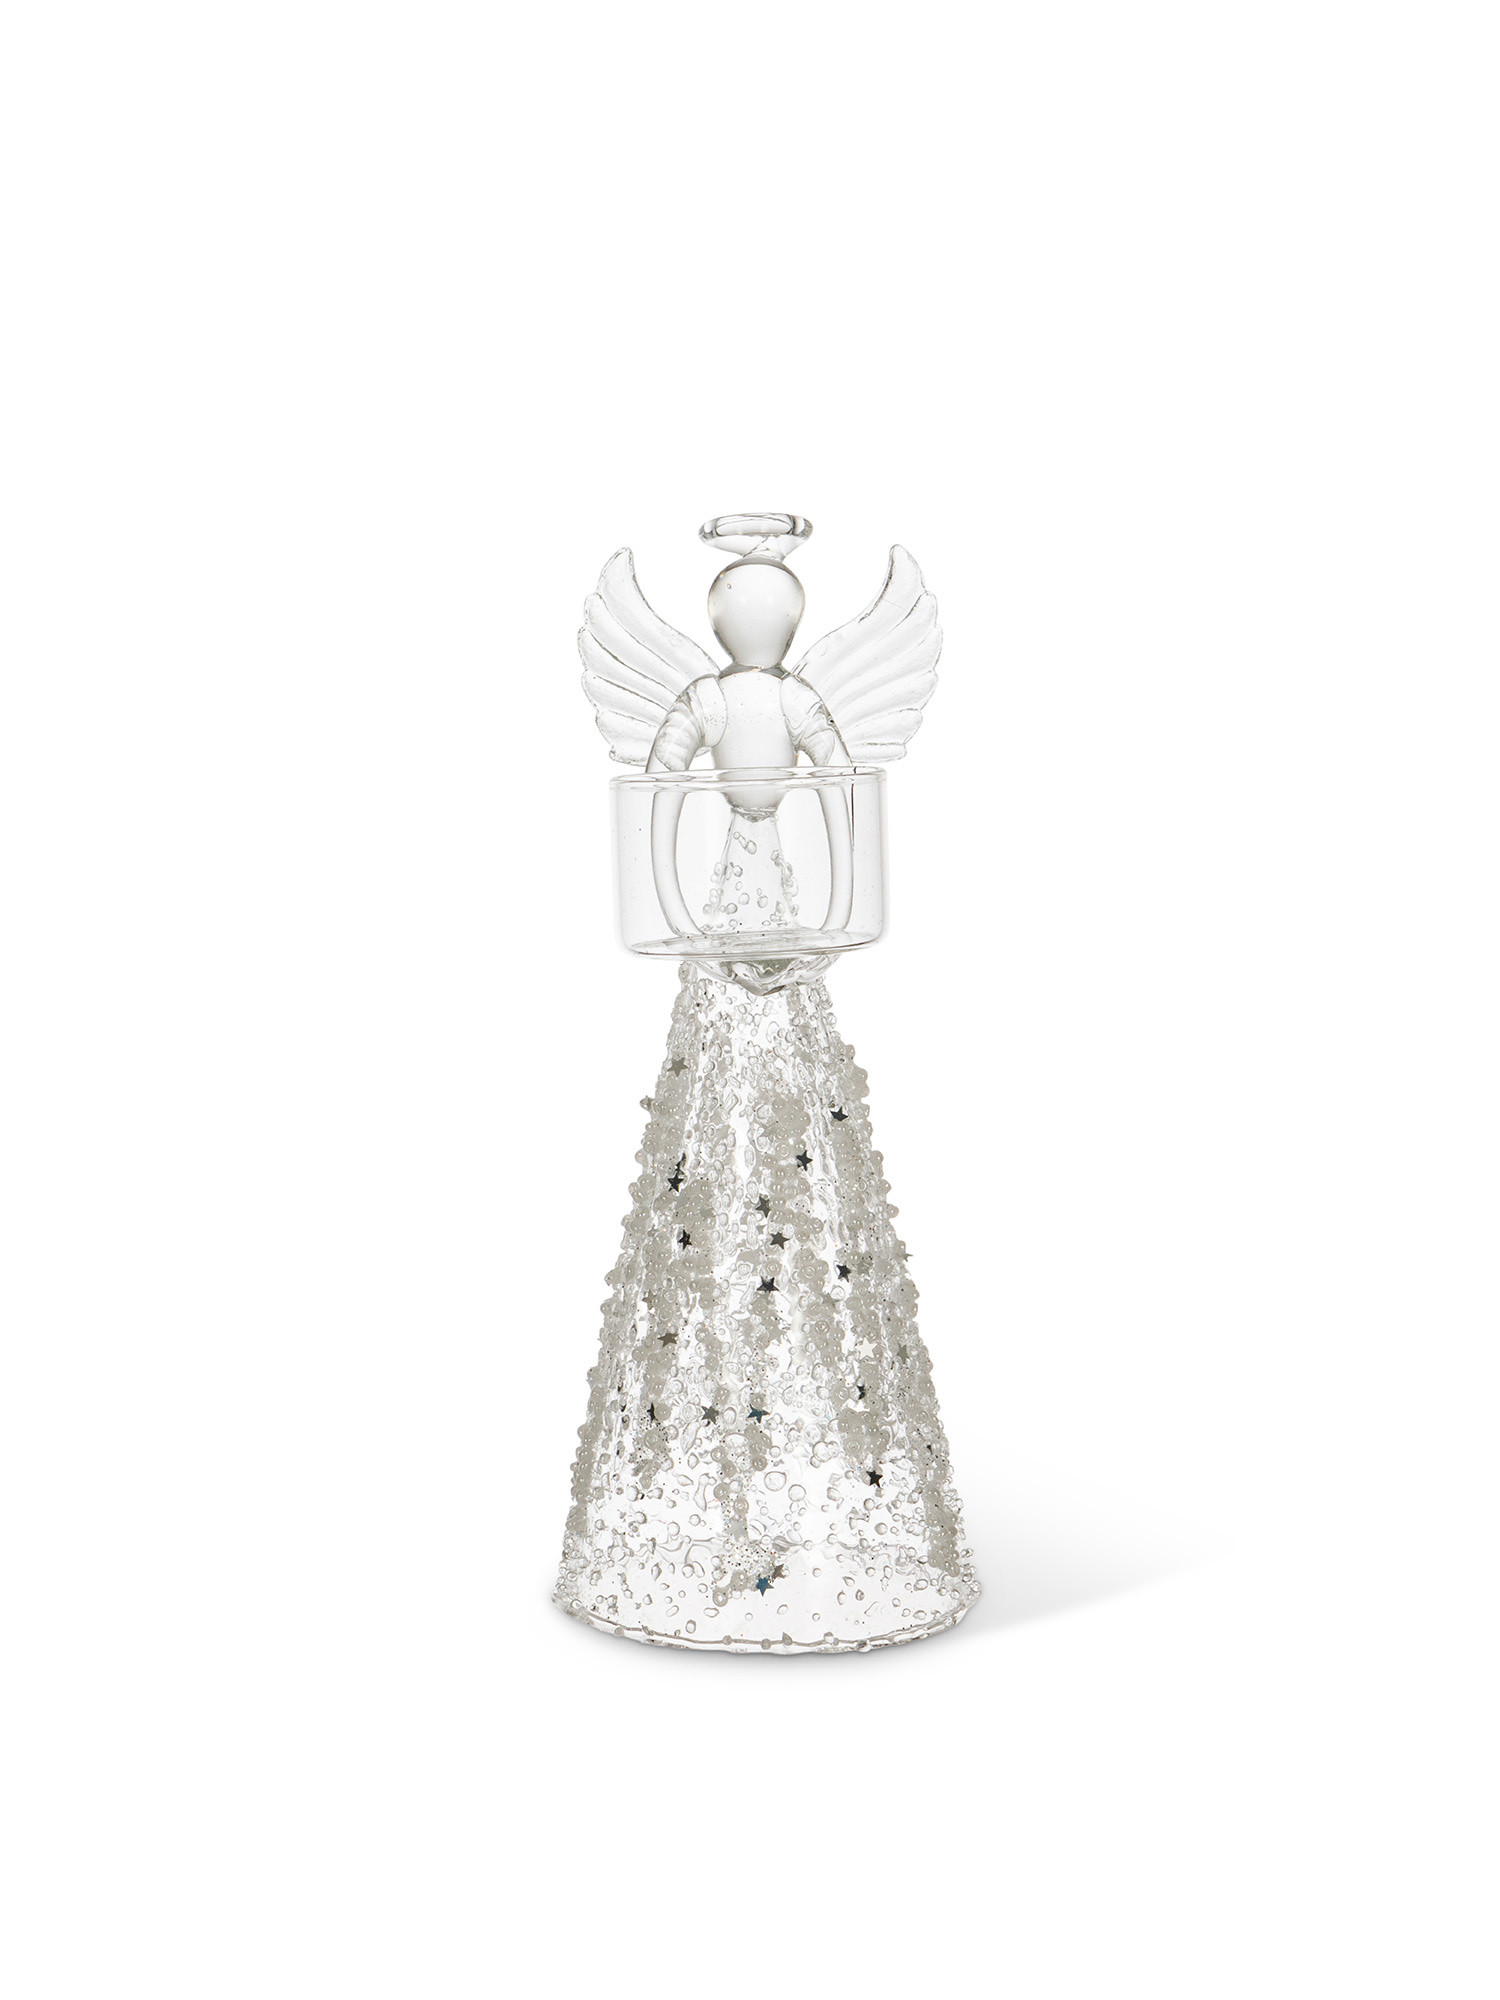 Decorative glass angel with t-light holder, White, large image number 0